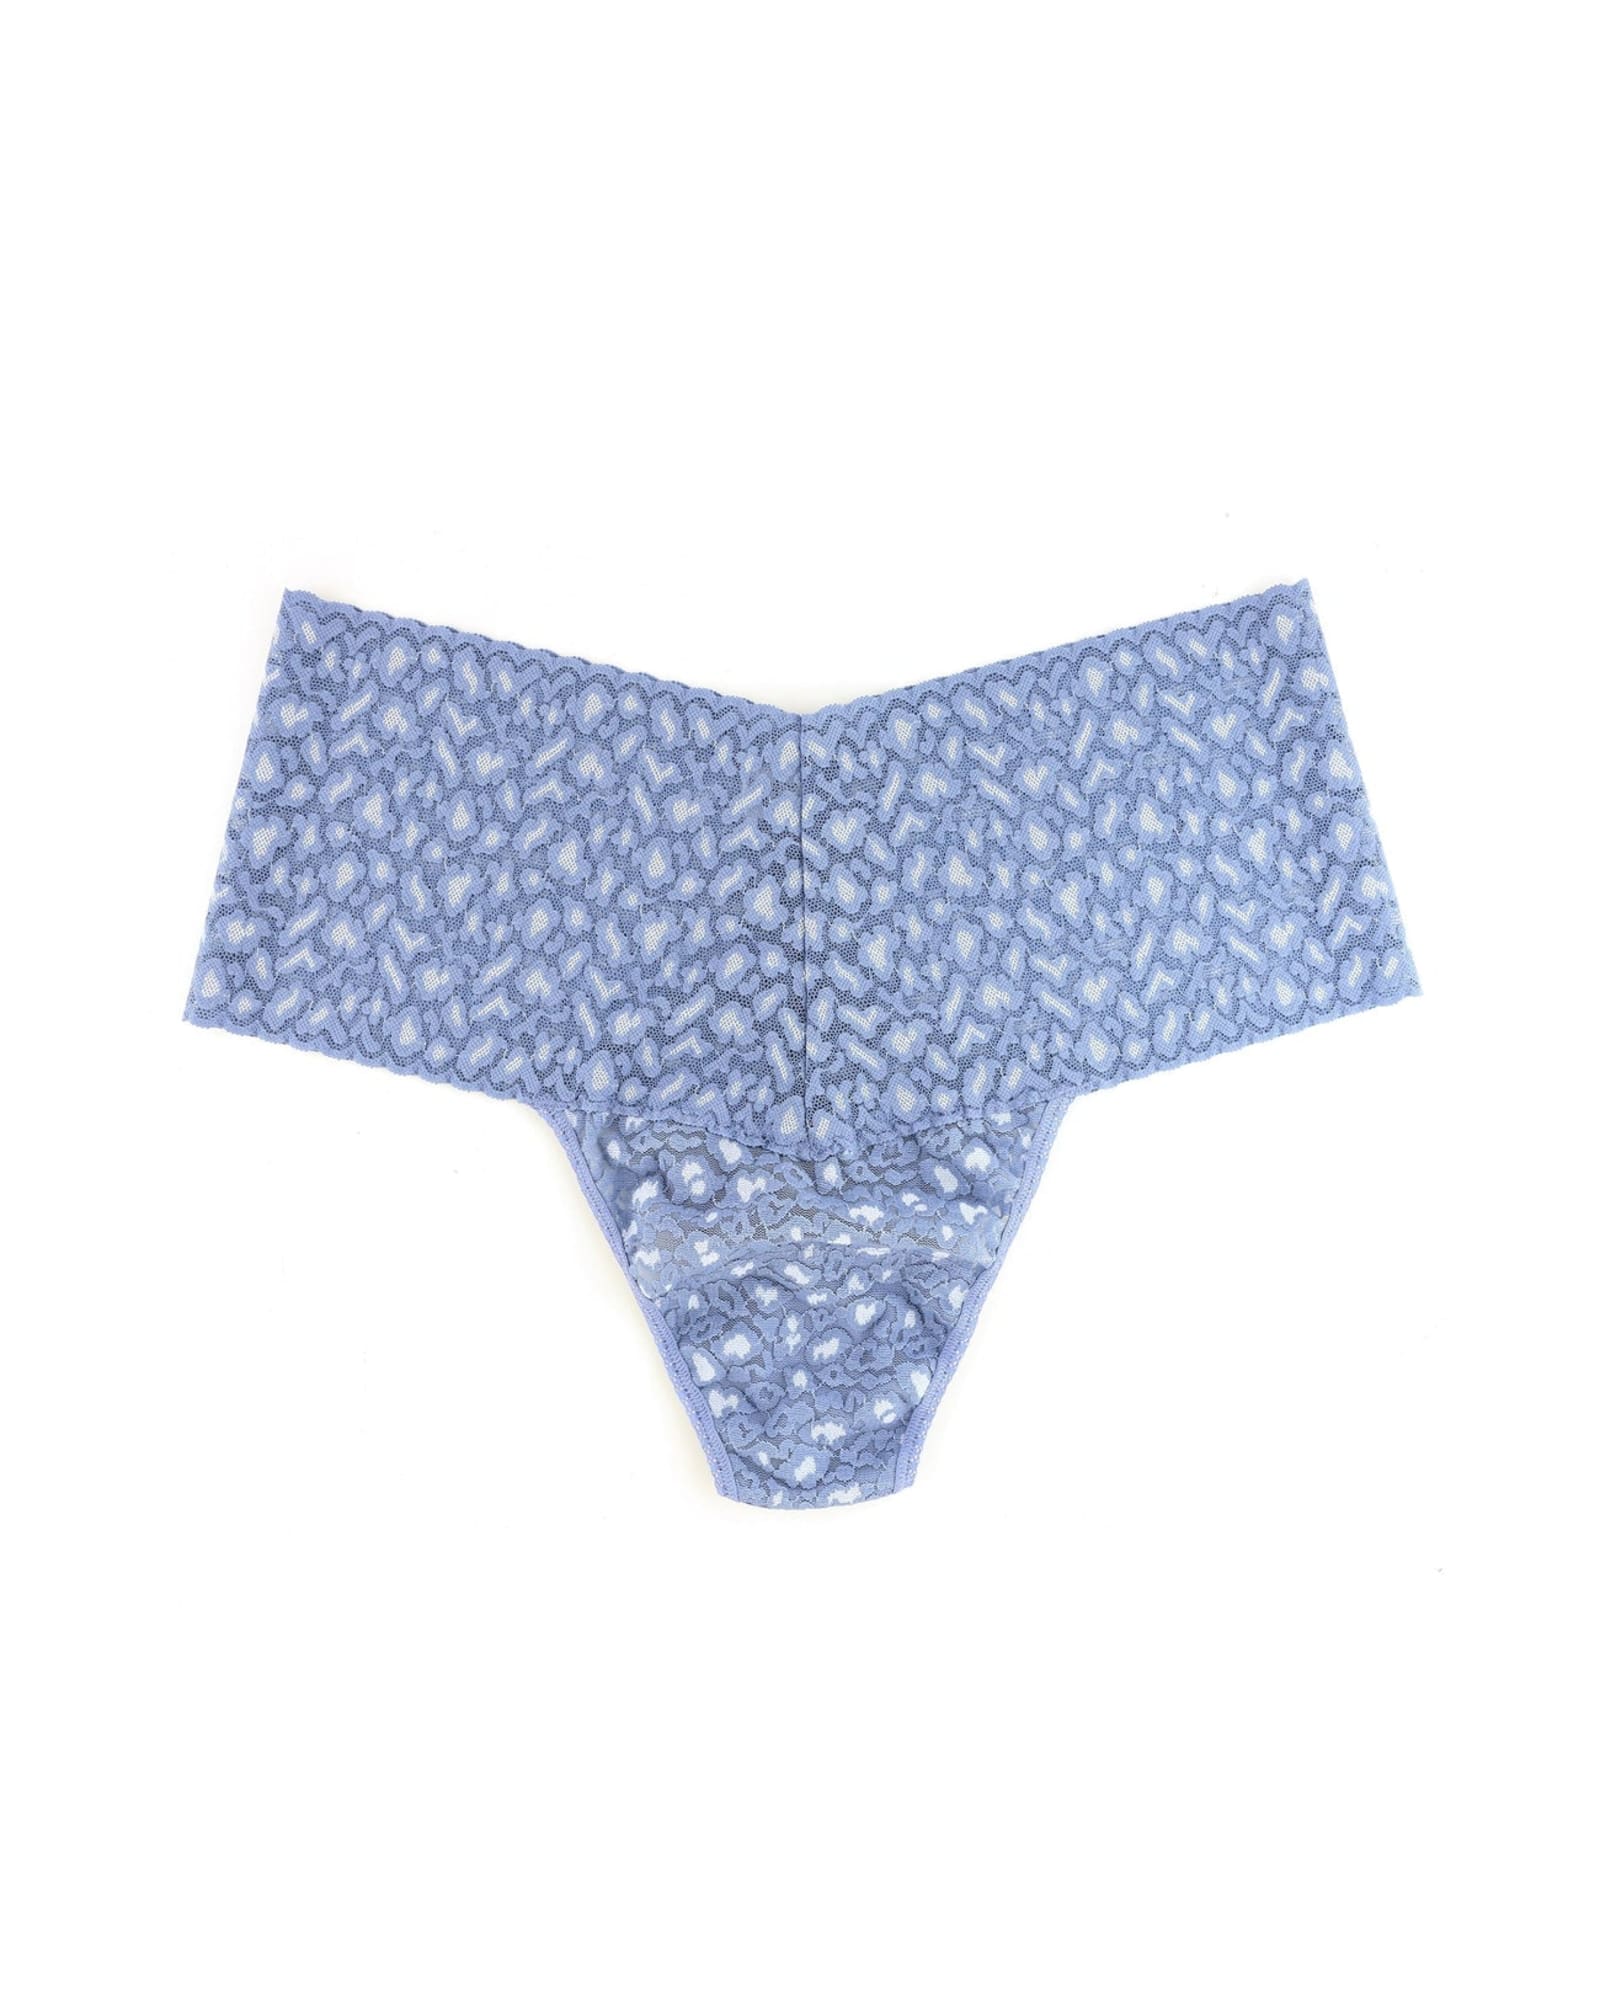 CROSS-DYED LEOPARD RETRO LACE PLUS THONG | SBSB-STONEWASH BLUE/SERENITY BLUE